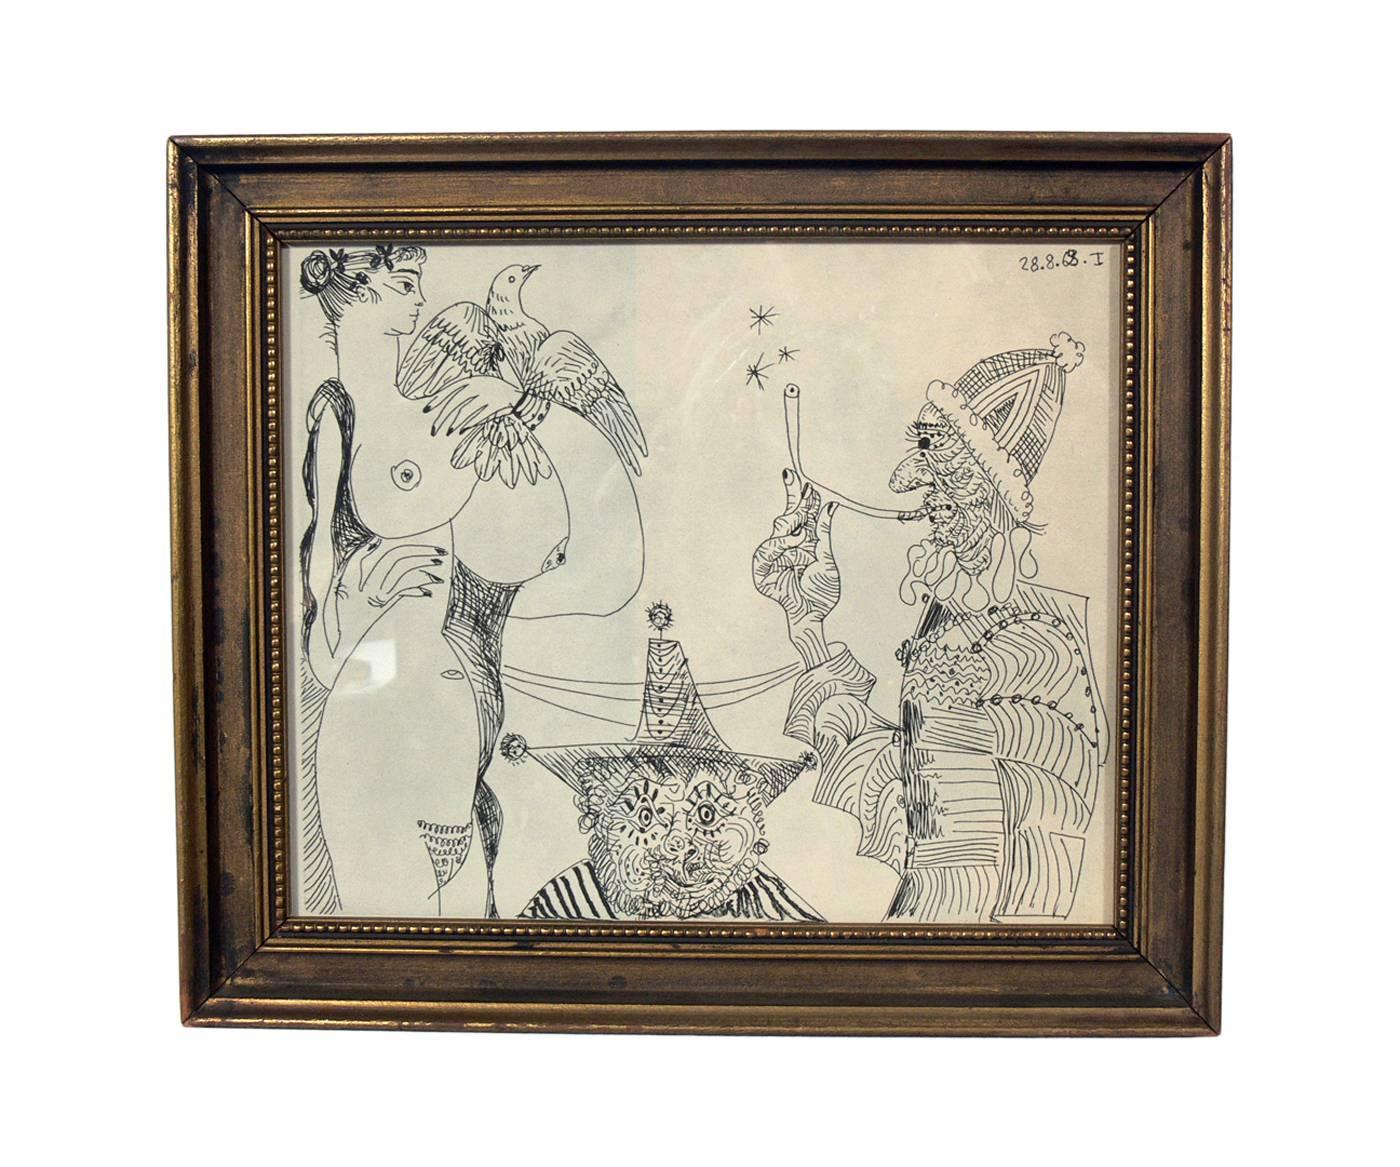 Glass Selection of Pablo Picasso Erotic Prints